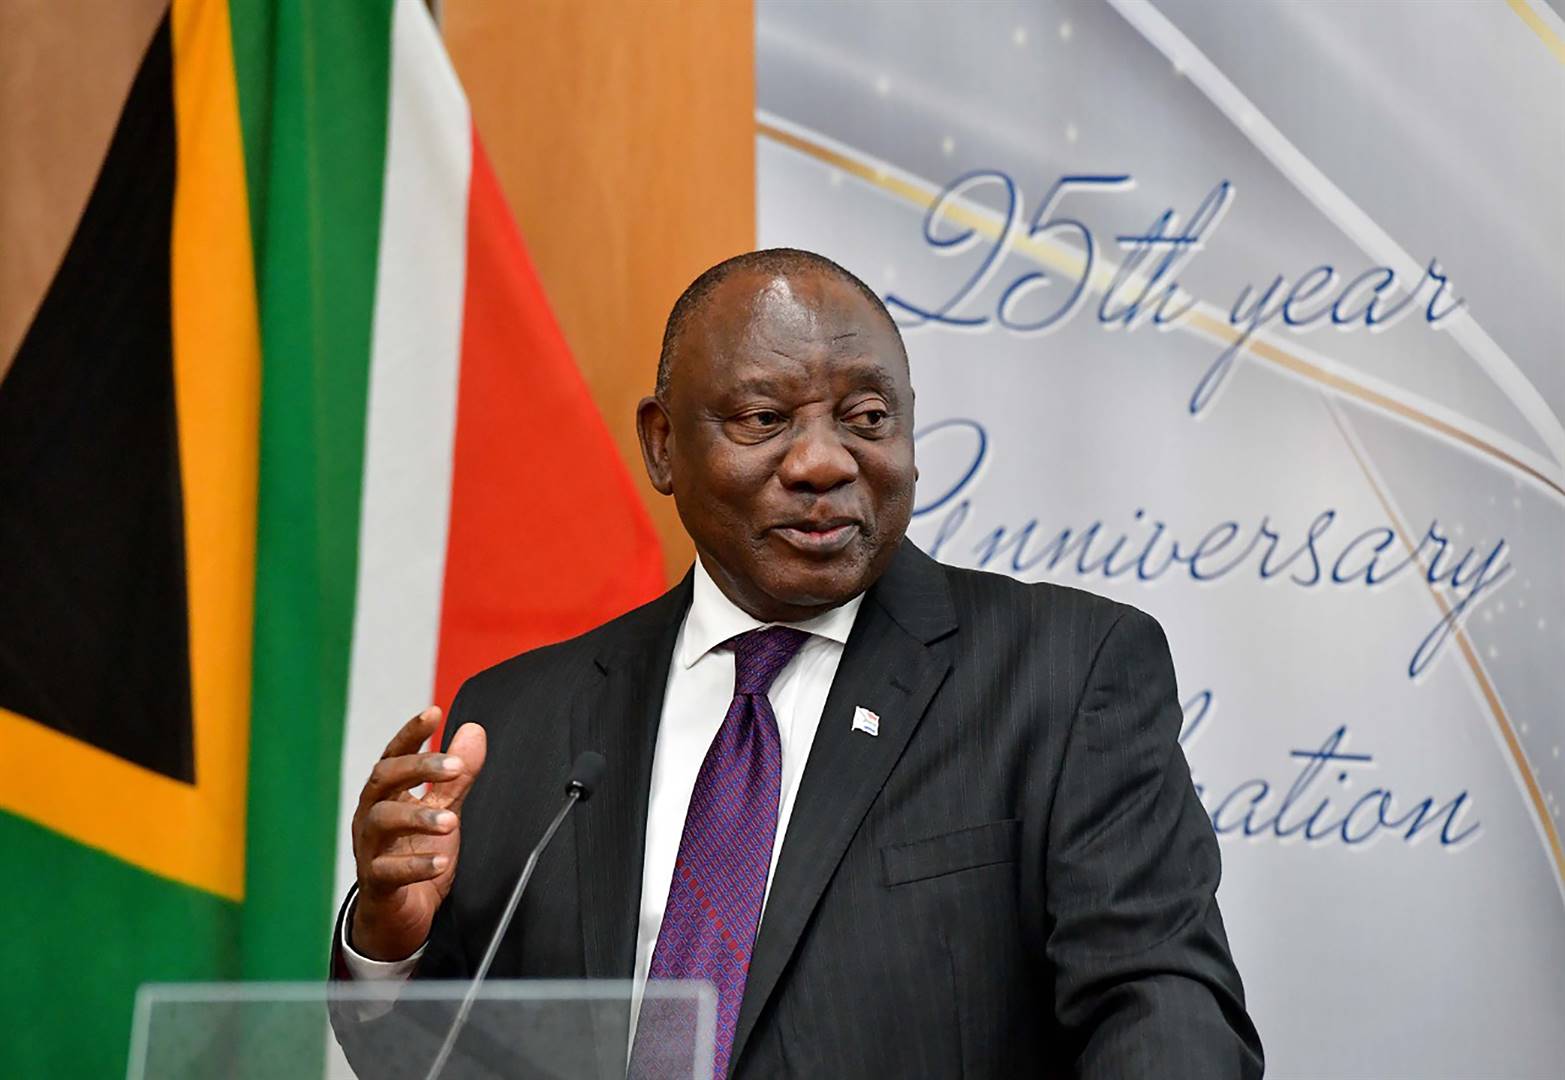 President Cyril Ramaphosa maintains he is not guilty of any crime.